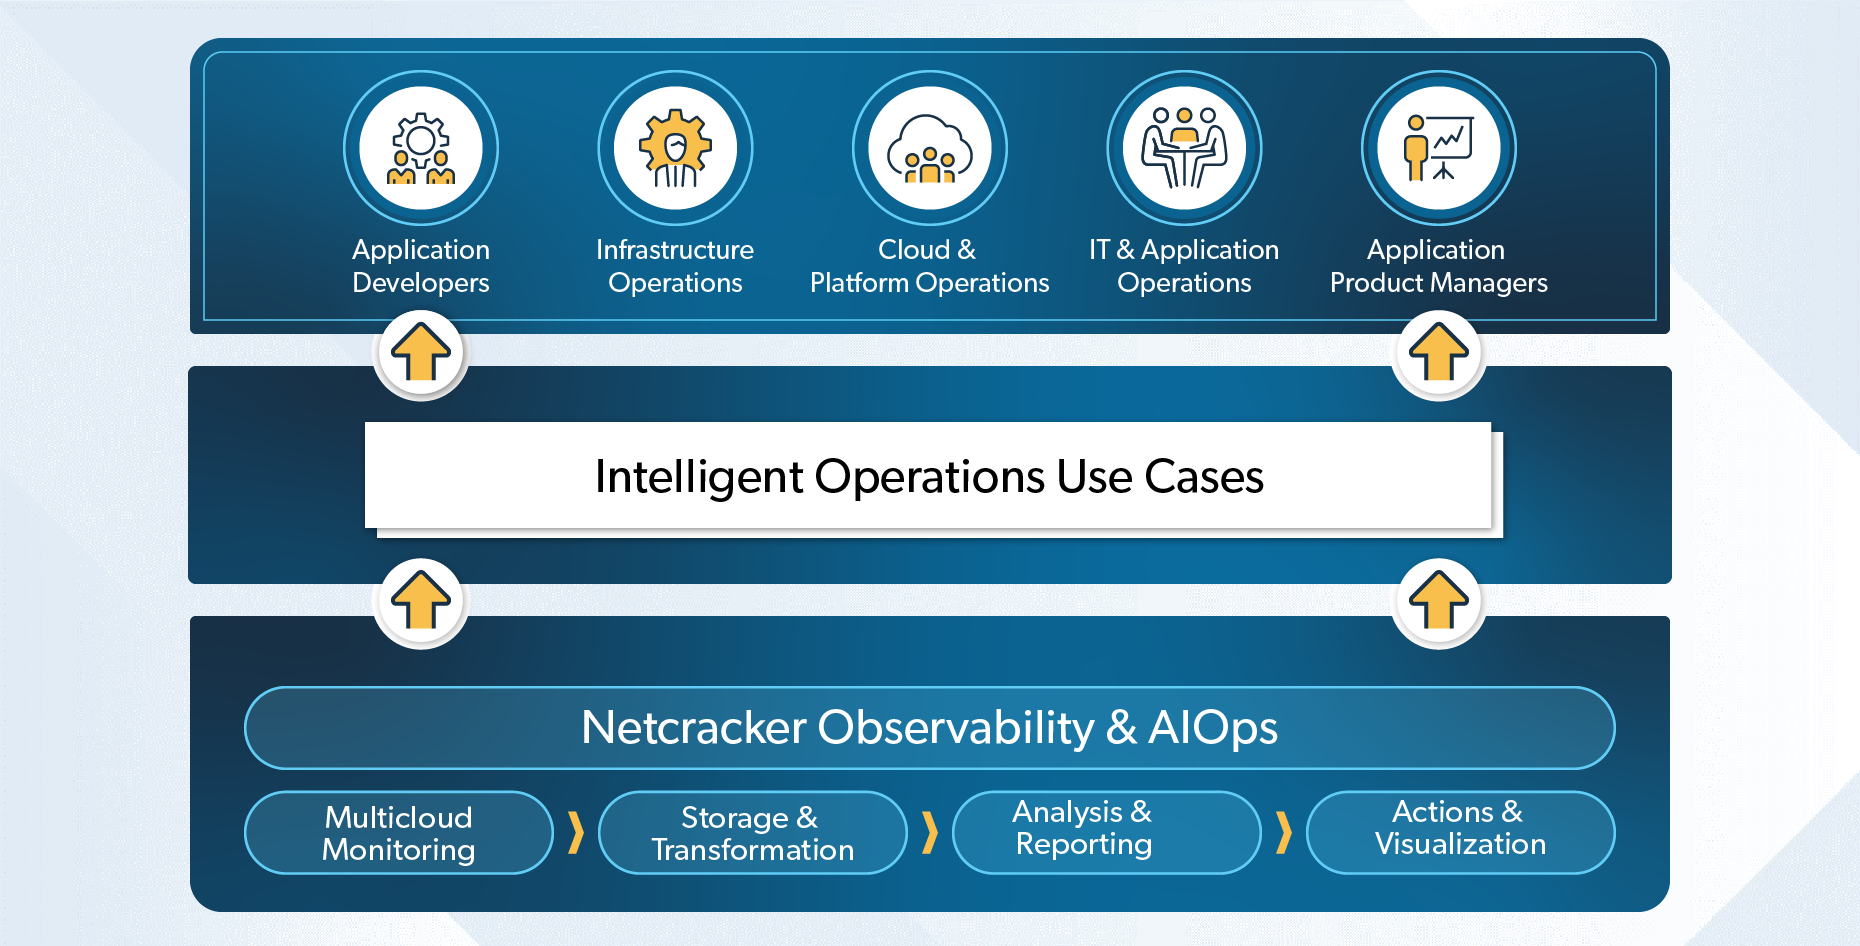 E2E observability with AIOps to ensure the highest service quality